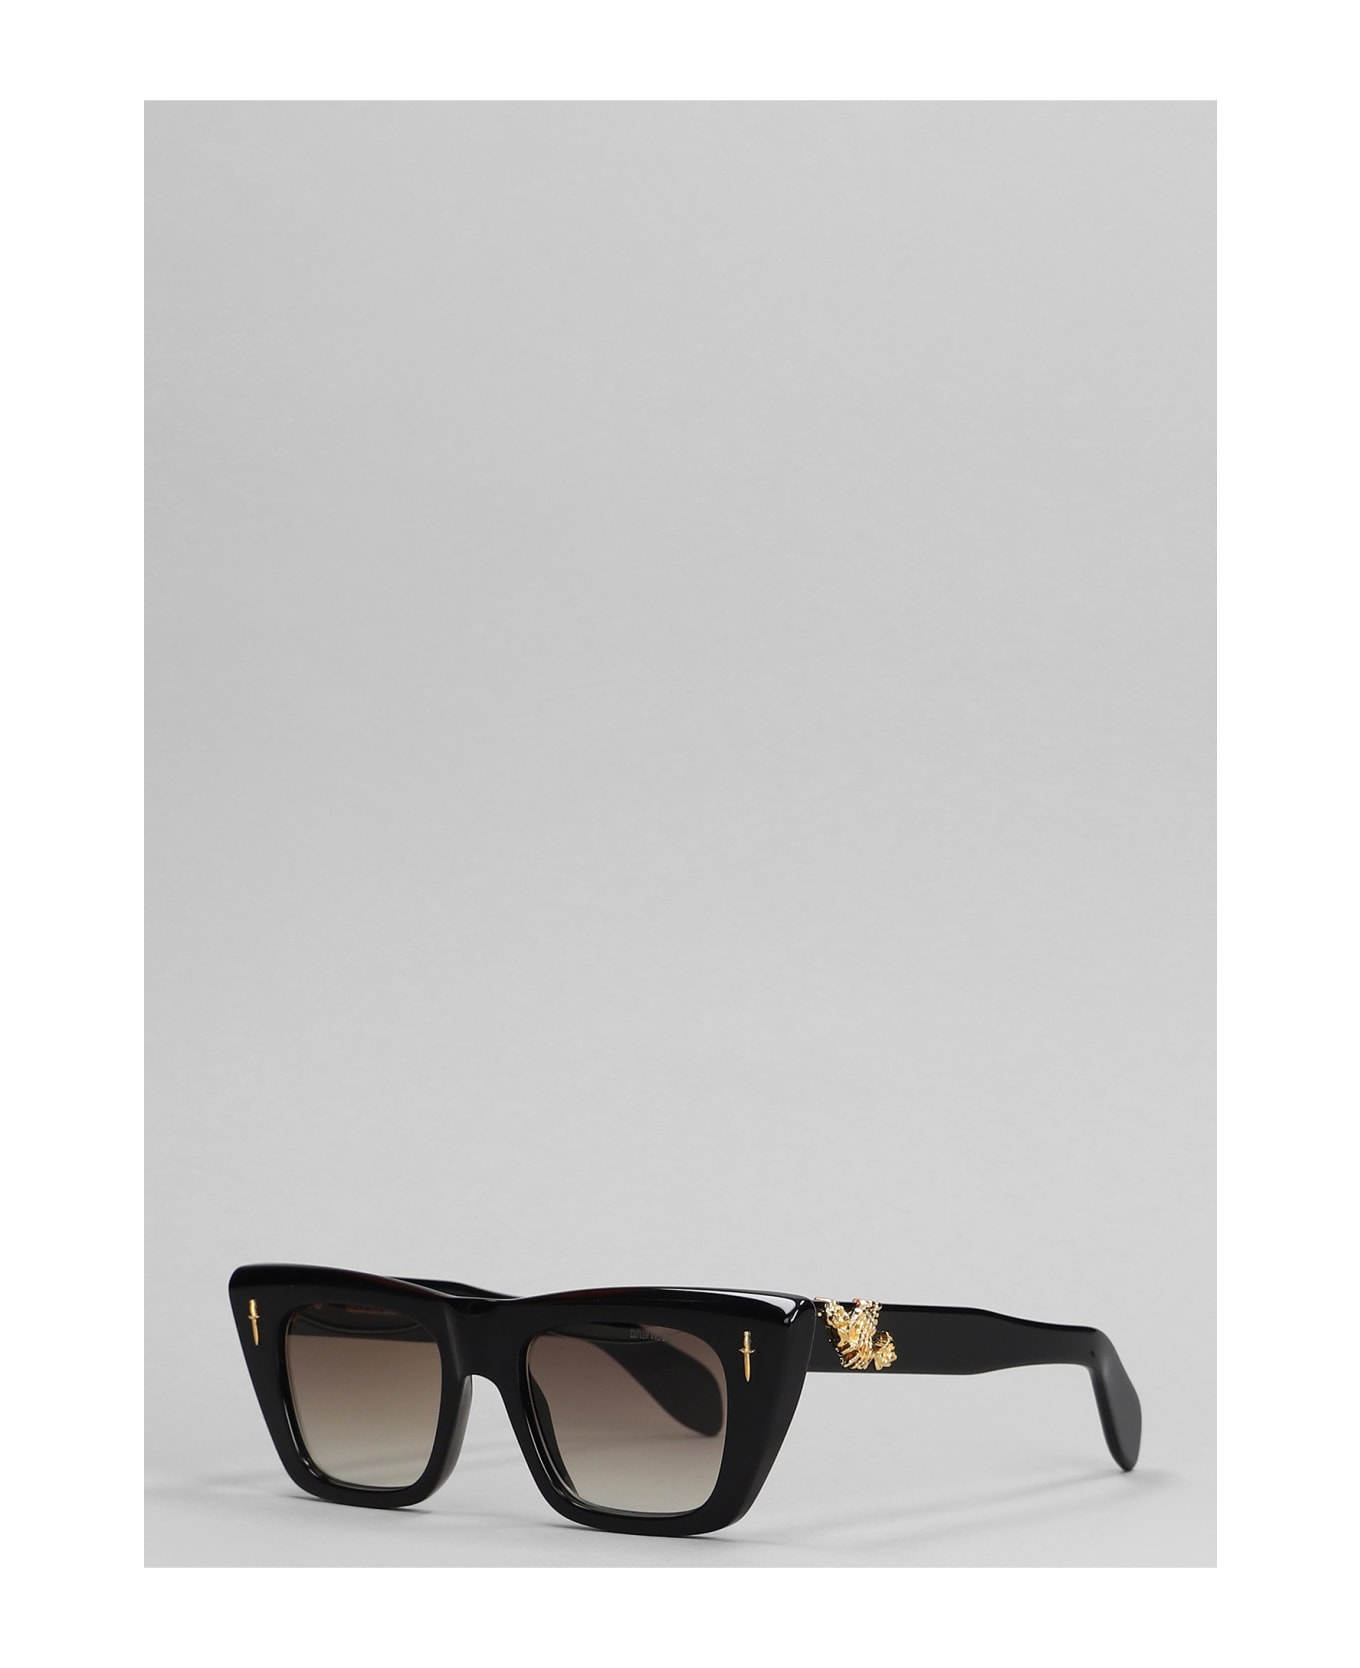 Cutler and Gross The Great Frog Sunglasses In Black Acetate - black